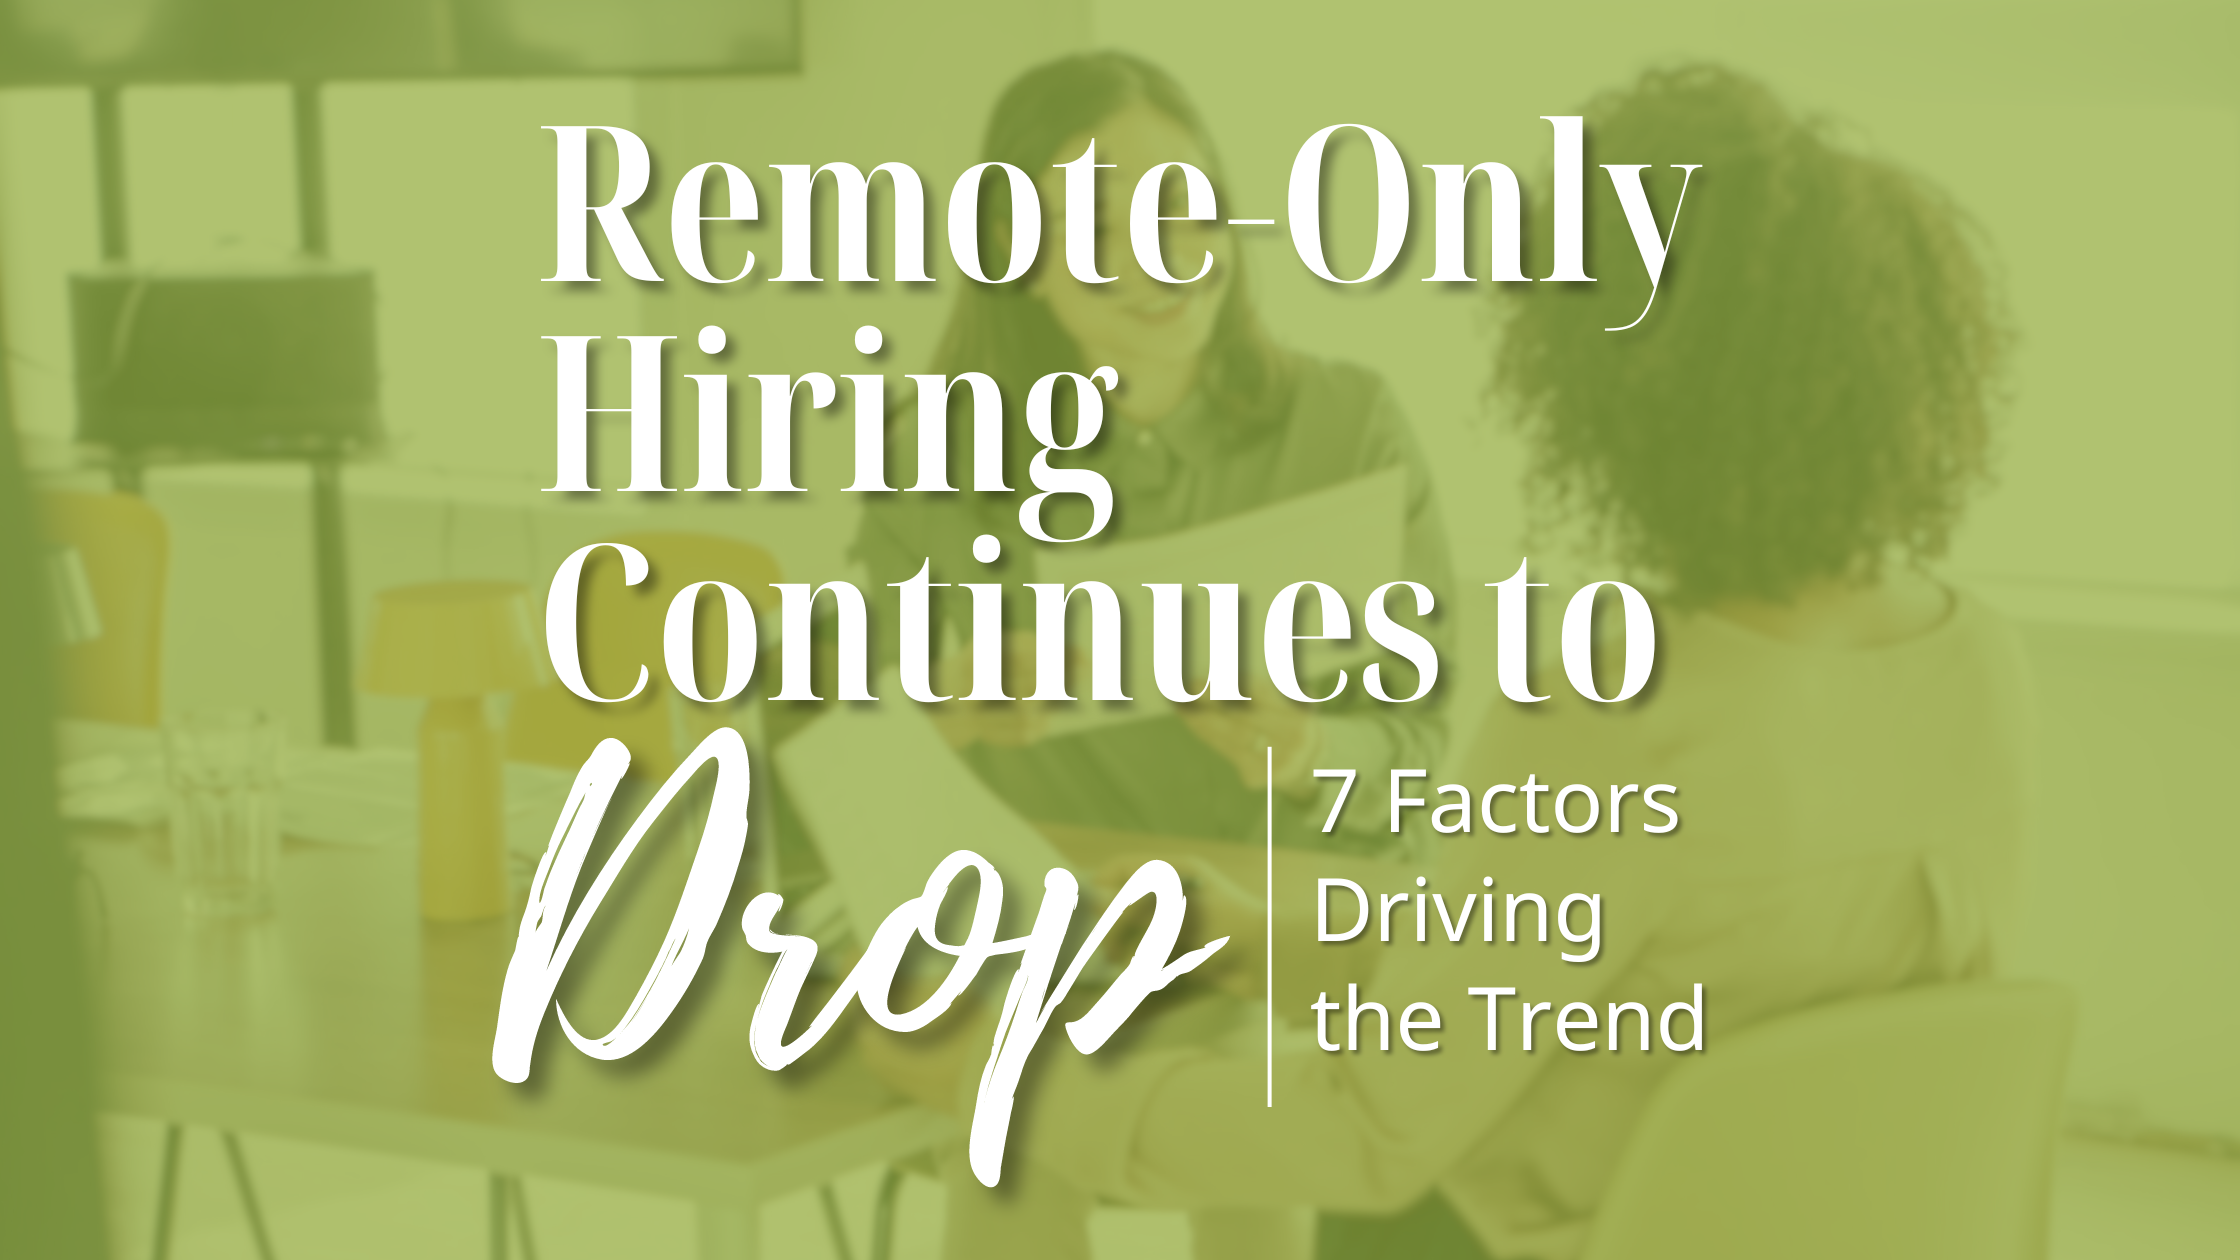 Remote-Only Hiring Continues to Drop: 7 Factors Driving the Trend